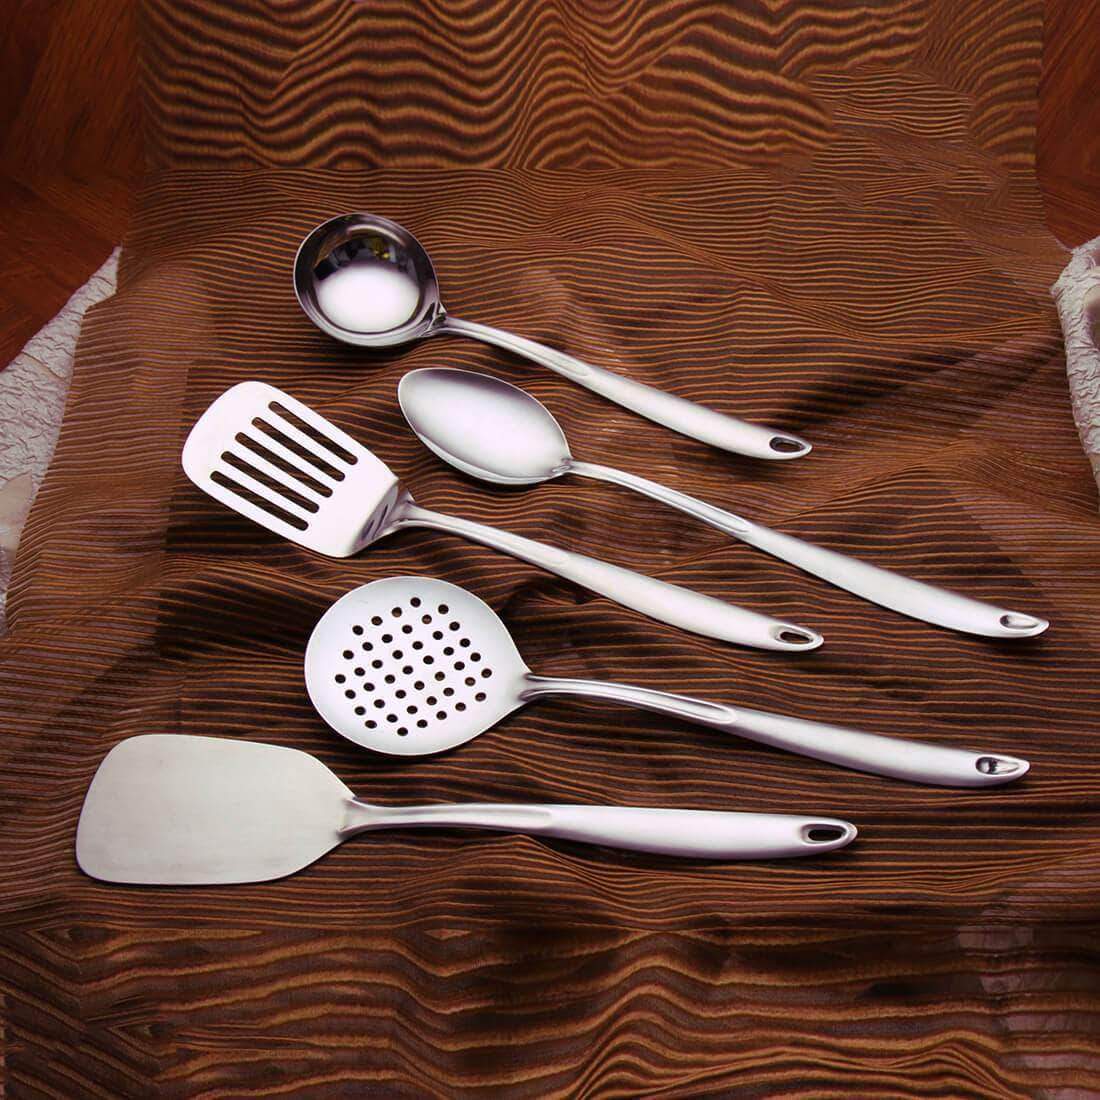 Top five kitchen tools that are a must-have!